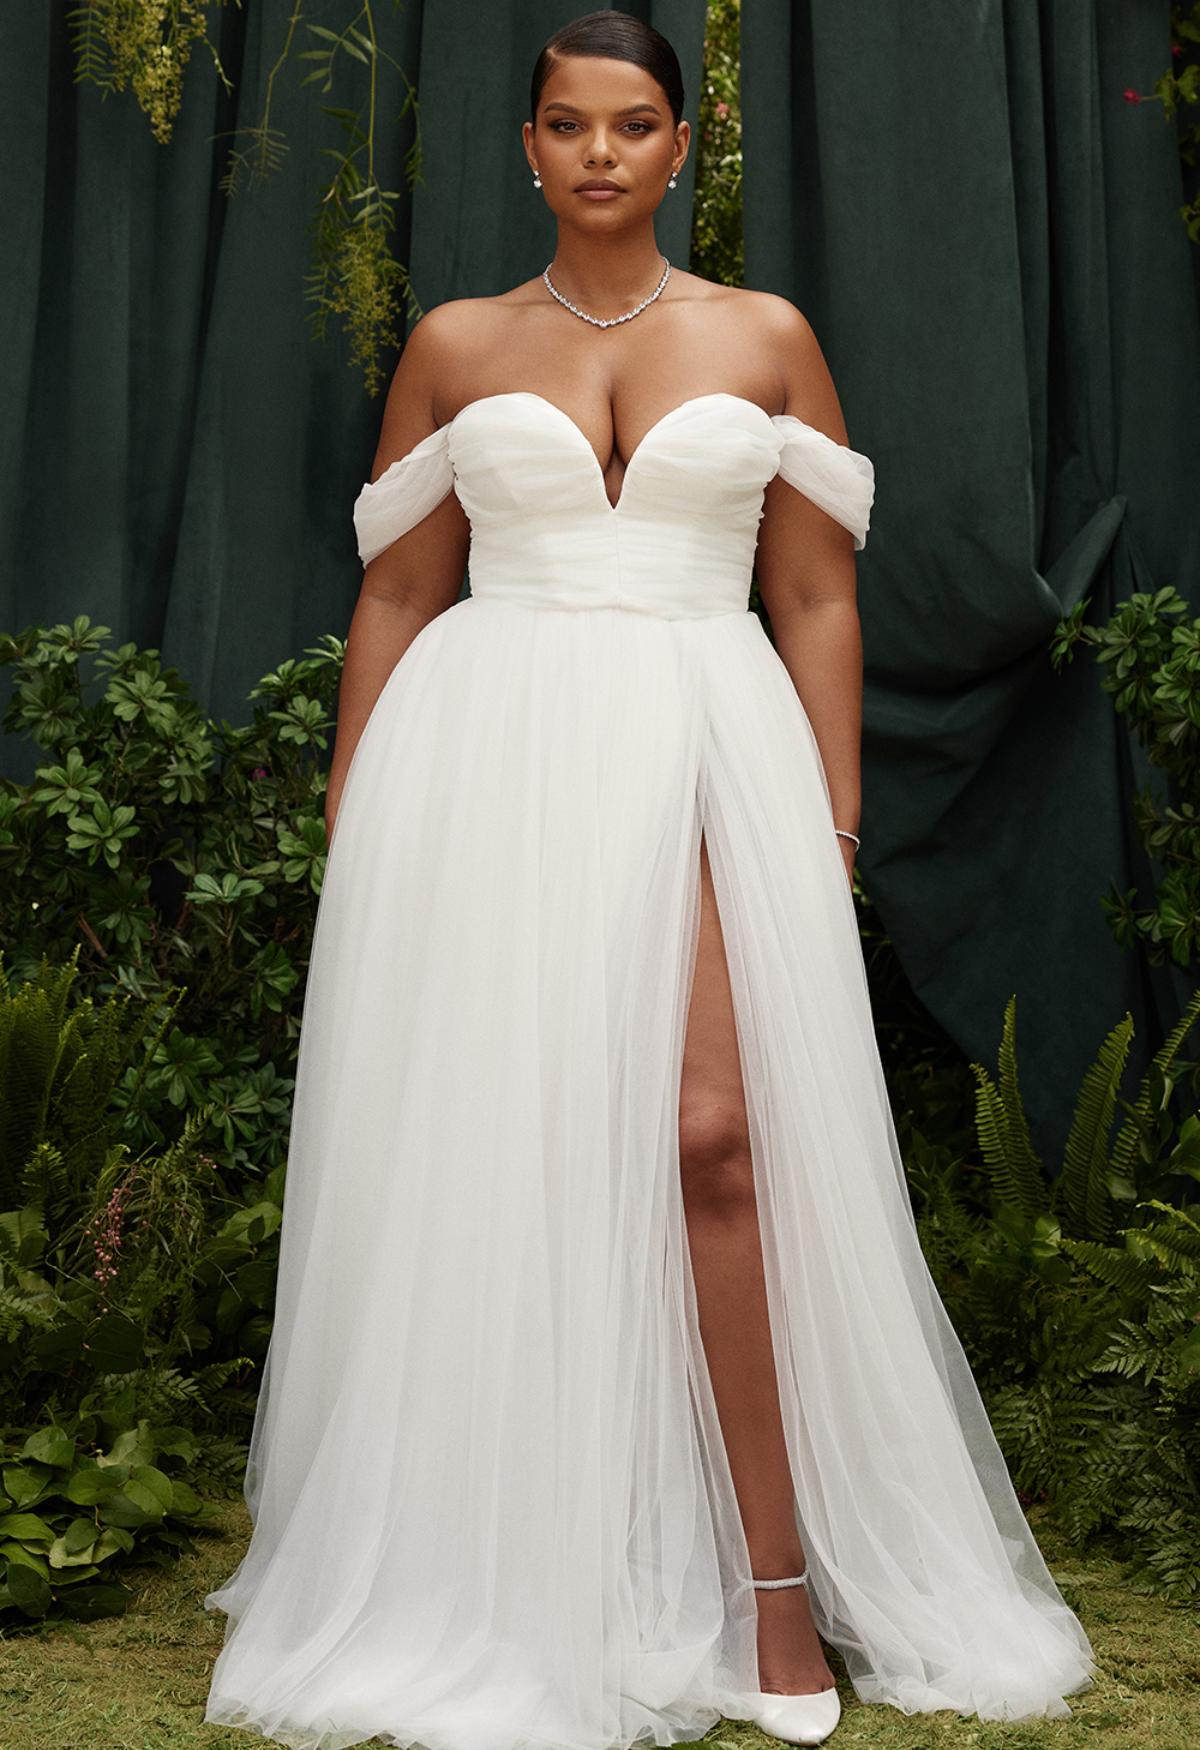 Cheap Wedding Dresses: 45 Affordable High Street Wedding Dresses -  hitched.co.uk